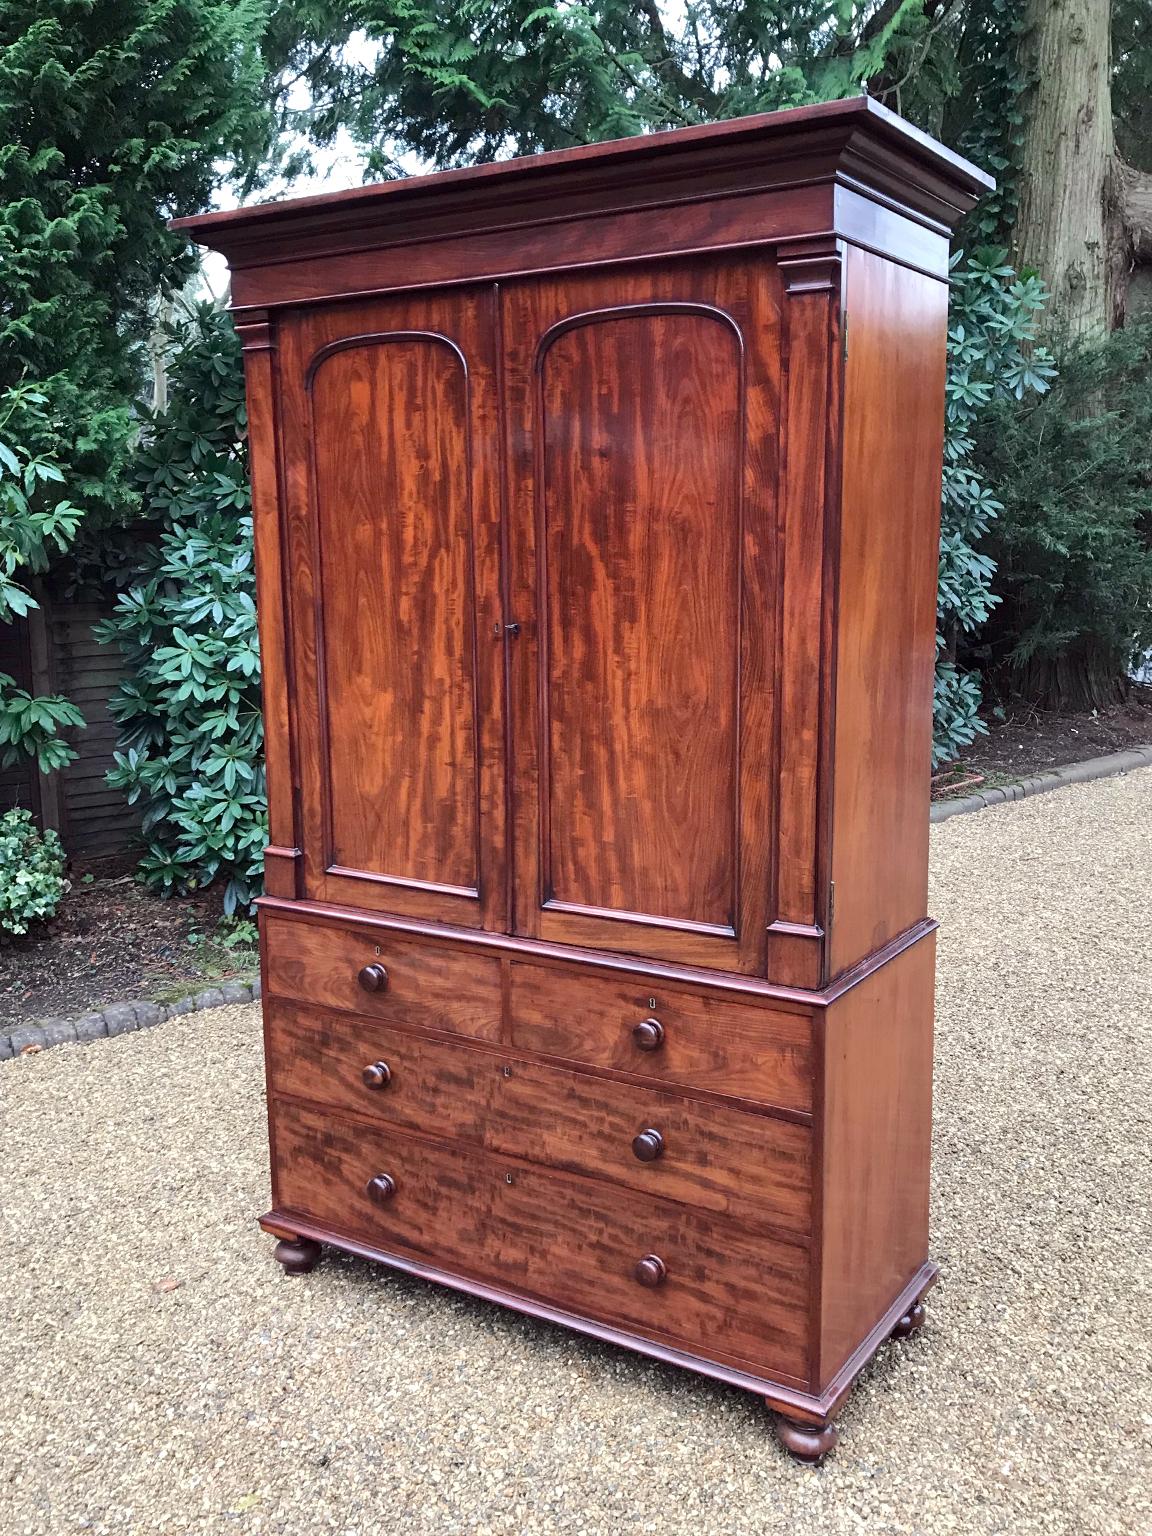 19th century William IV mahogany linen press with two panelled doors and four original interior sliding trays. Two short and two long solid oak lined drawers with original turned bun handles and turned feet. Comes apart in three separate